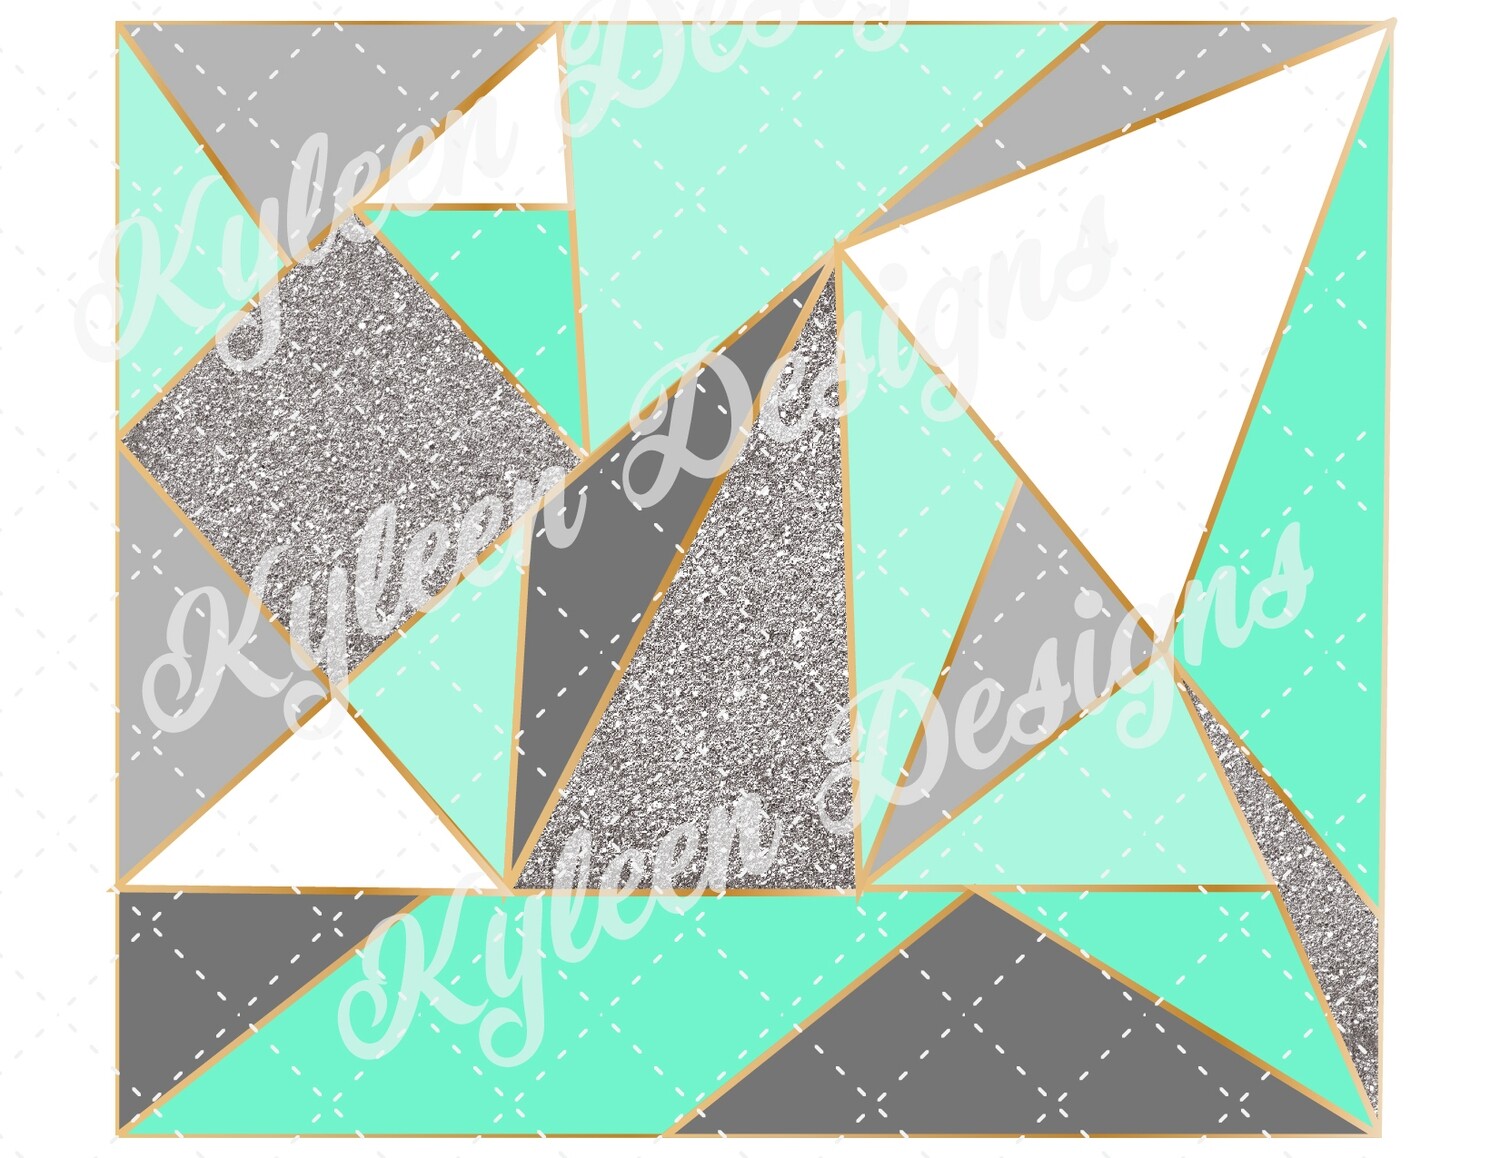 20 ounce straight teal and grey true tangram wrap for sublimation, waterslide High res PNG digital file